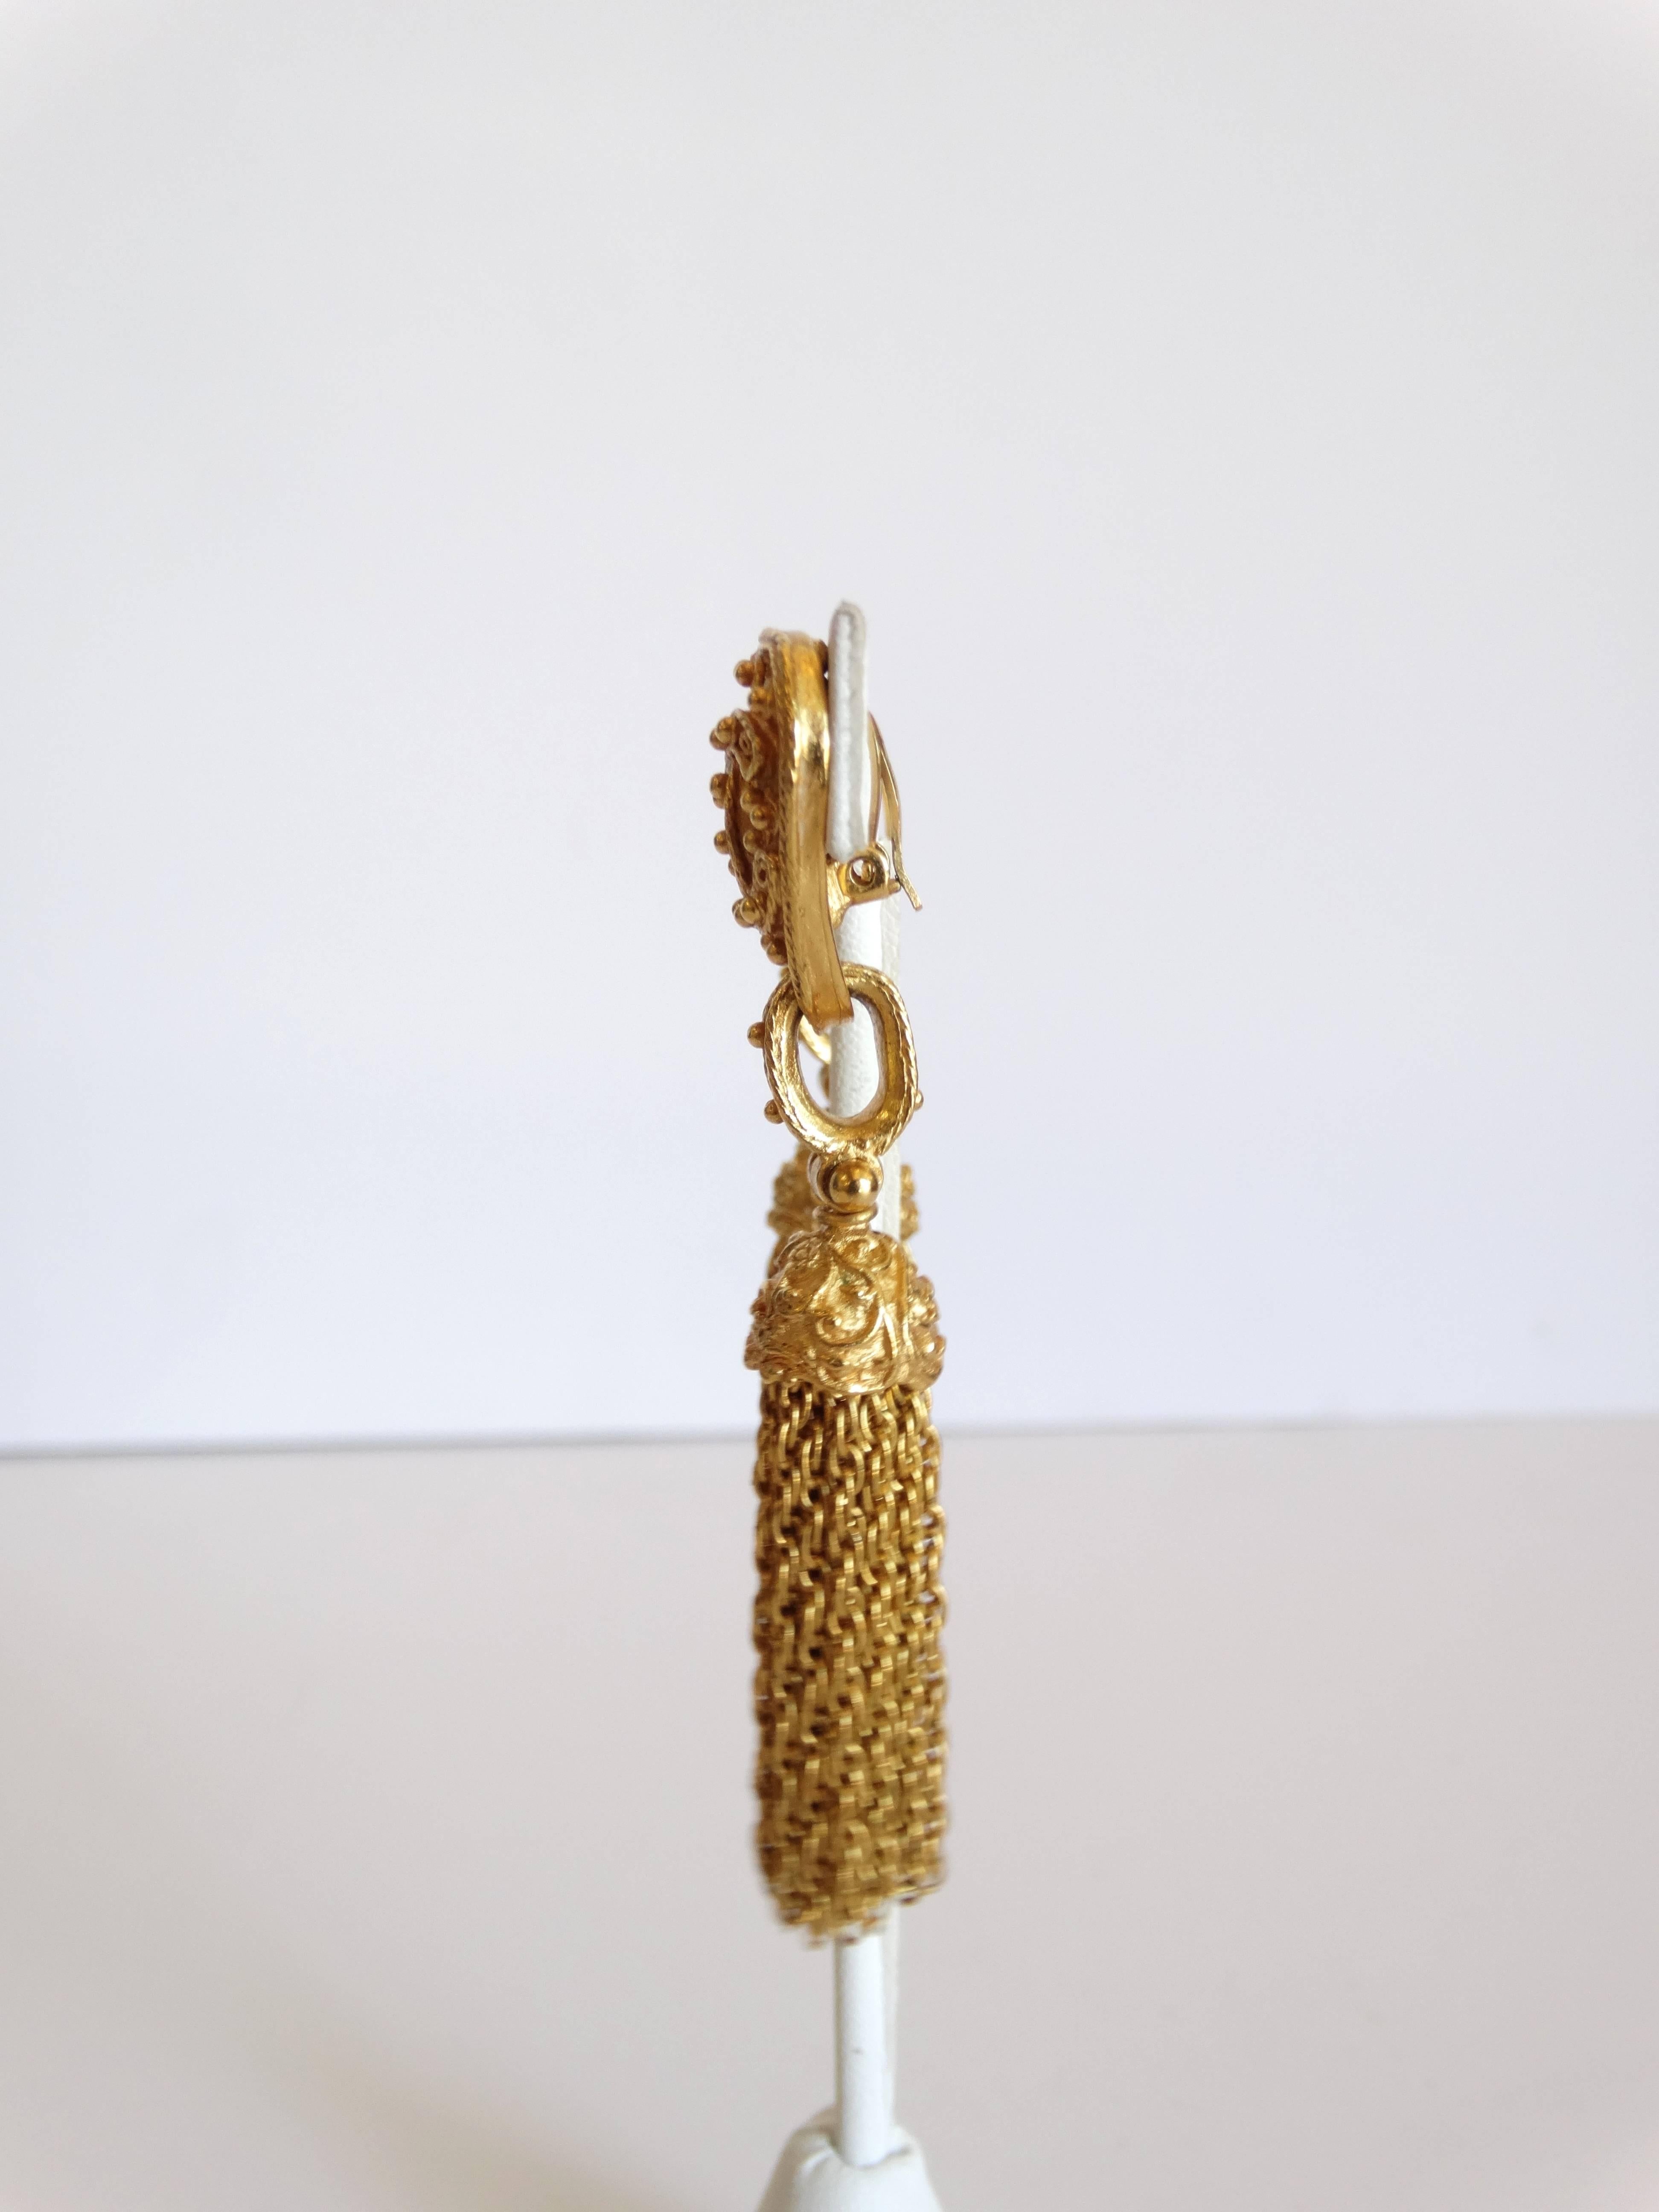 Circa 1994 Chanel ....Nothing is more delightful than a tassel! These Chanel Logo Tassel Earrings do just the trick! These earrings feature gold tone hardware with interlocking 'CC' logo at the top with tassel scroll detailing.

Measurements: 3